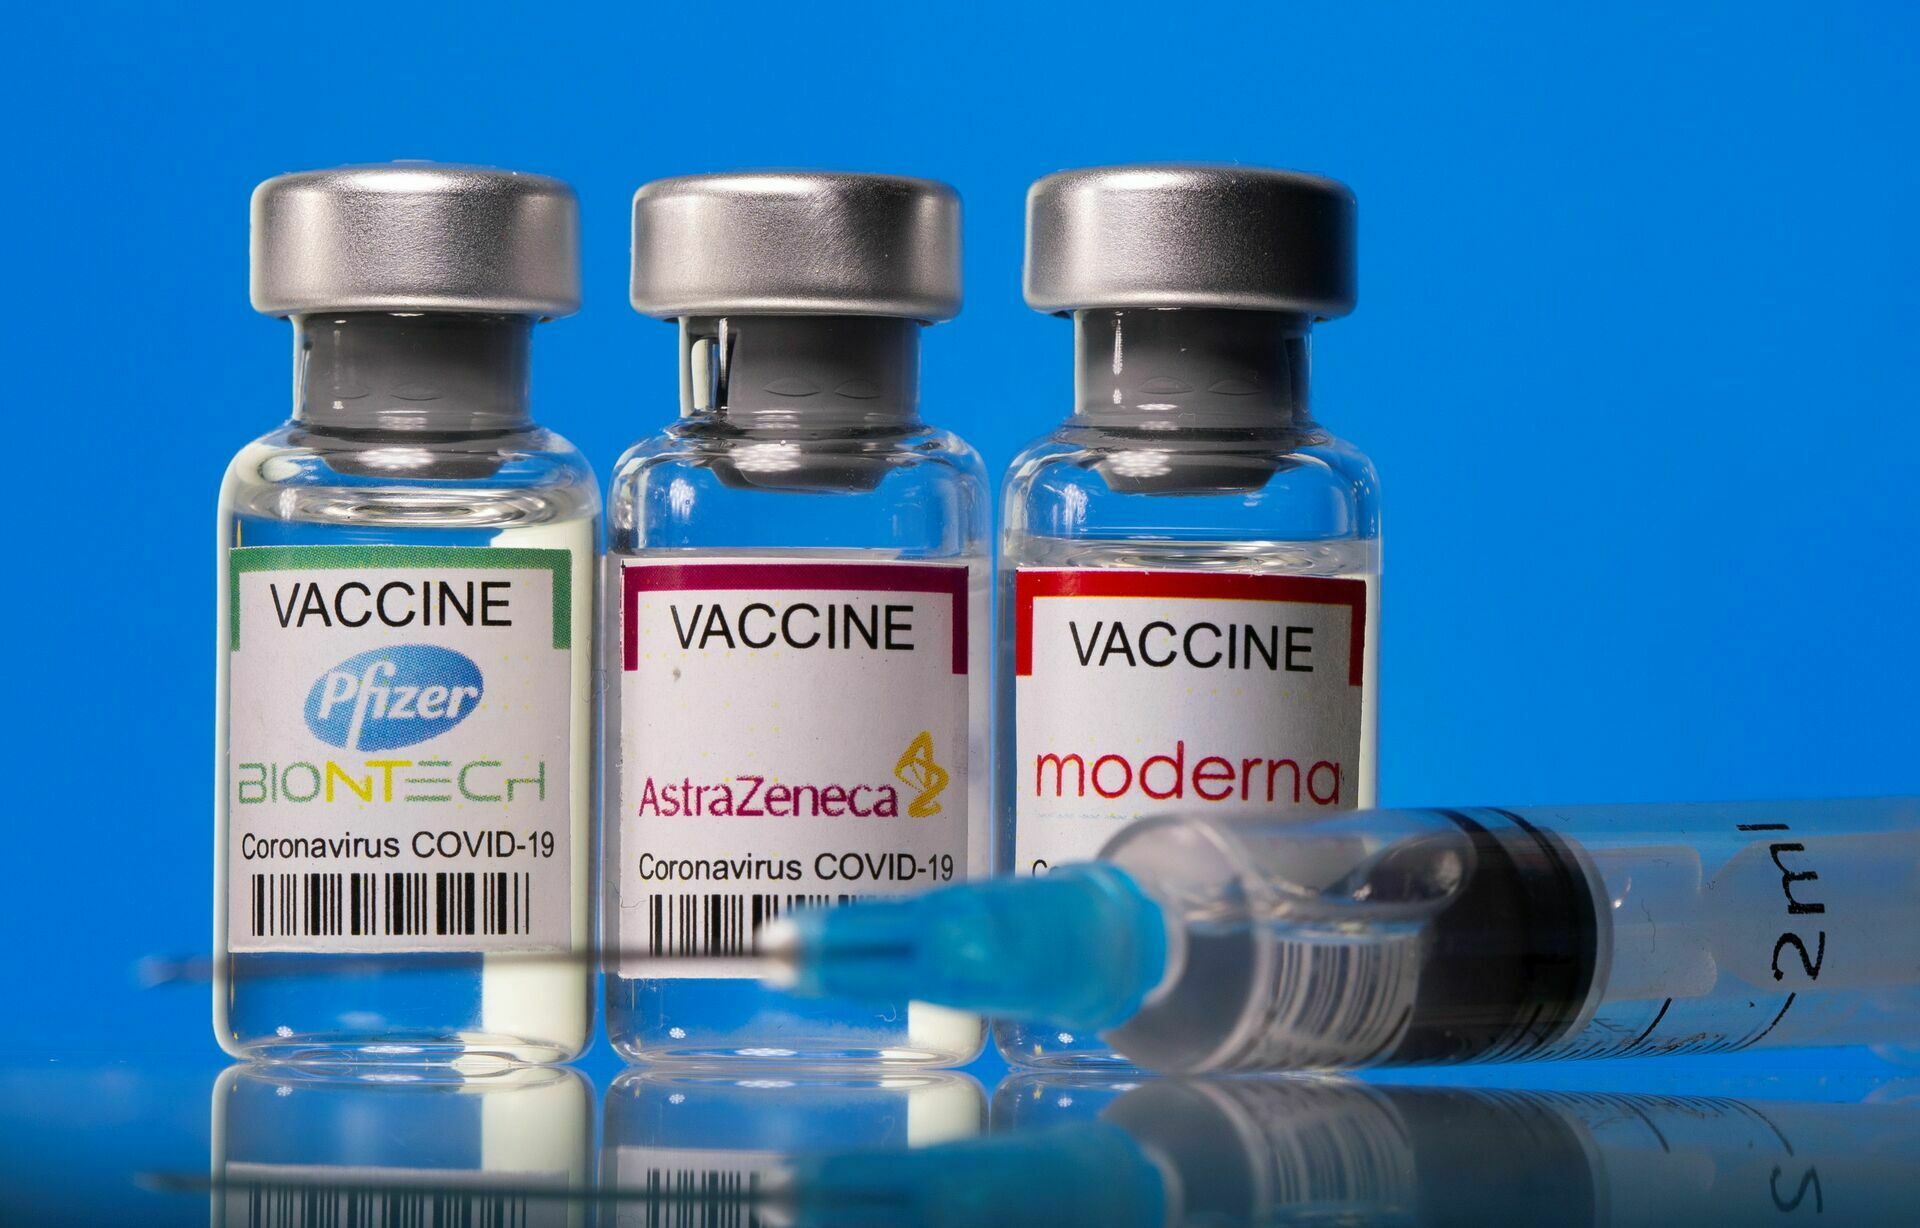 "Indecent amounts": human rights activists accuse vaccine manufacturers of speculation